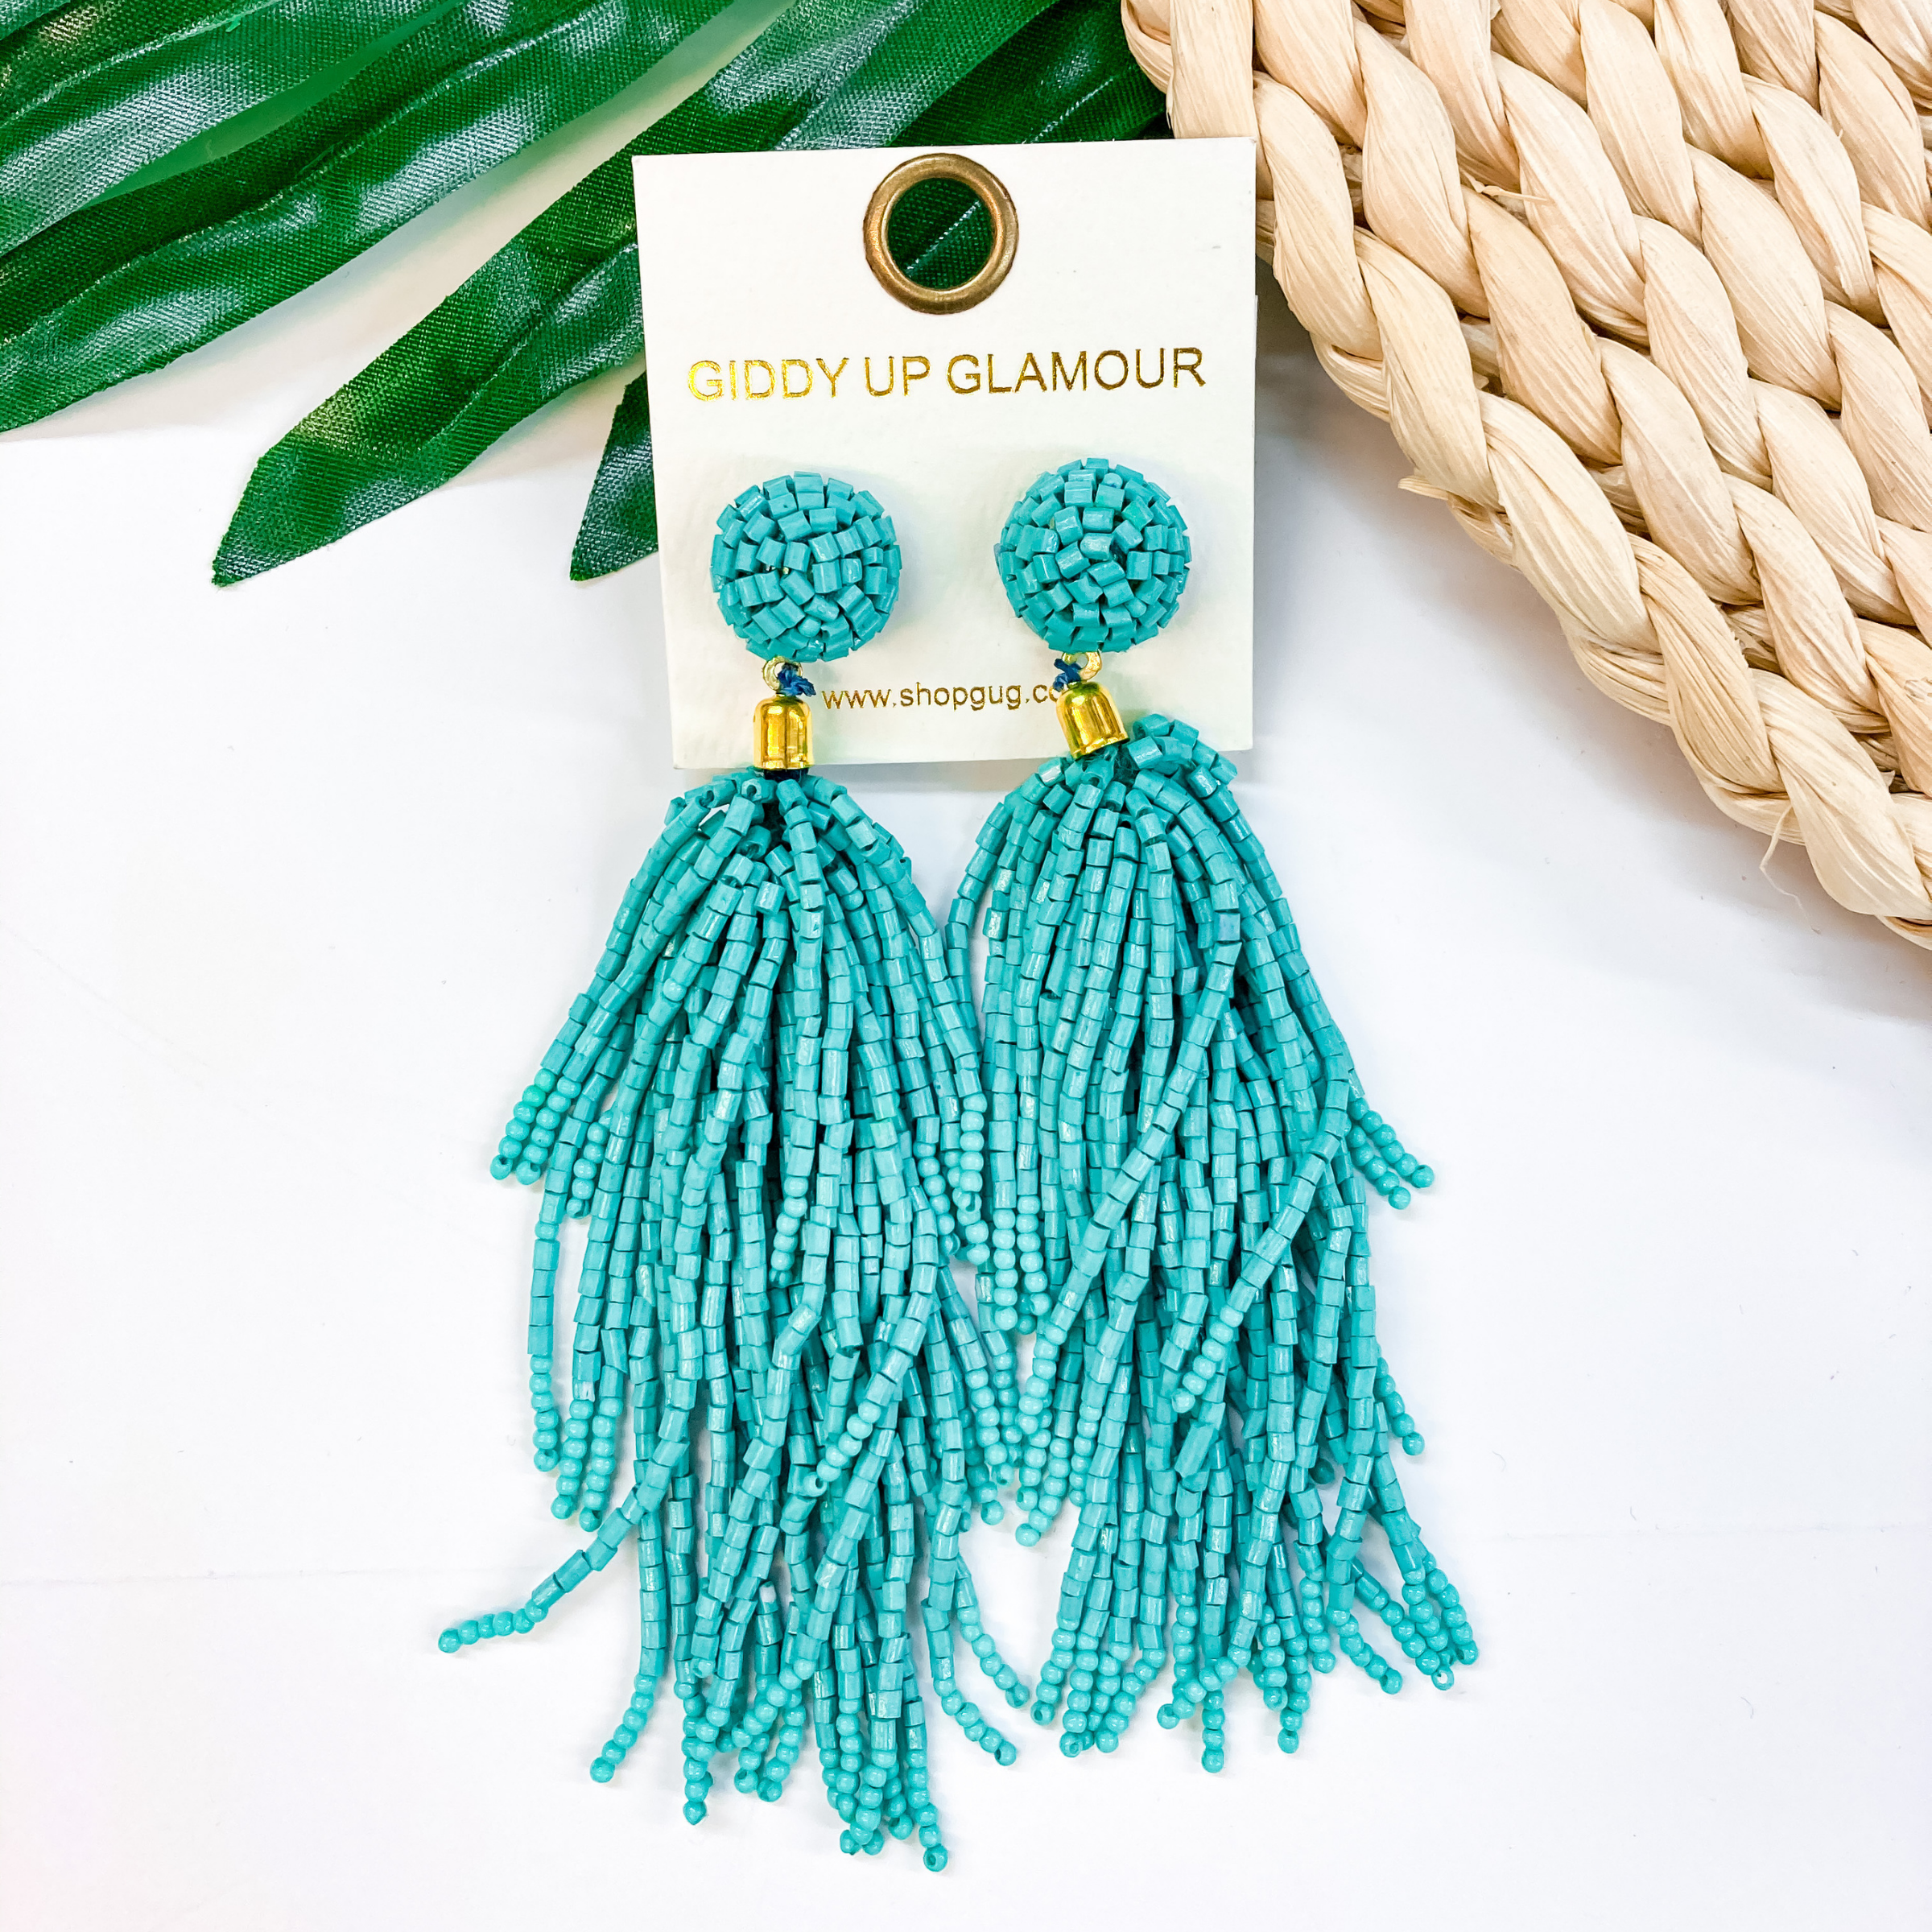 Circle, beaded post back stud earrings with a hanging beaded tassel in turquoise. These earrings are pictured on a white background with a green leaf and tan basket weave in the background. 